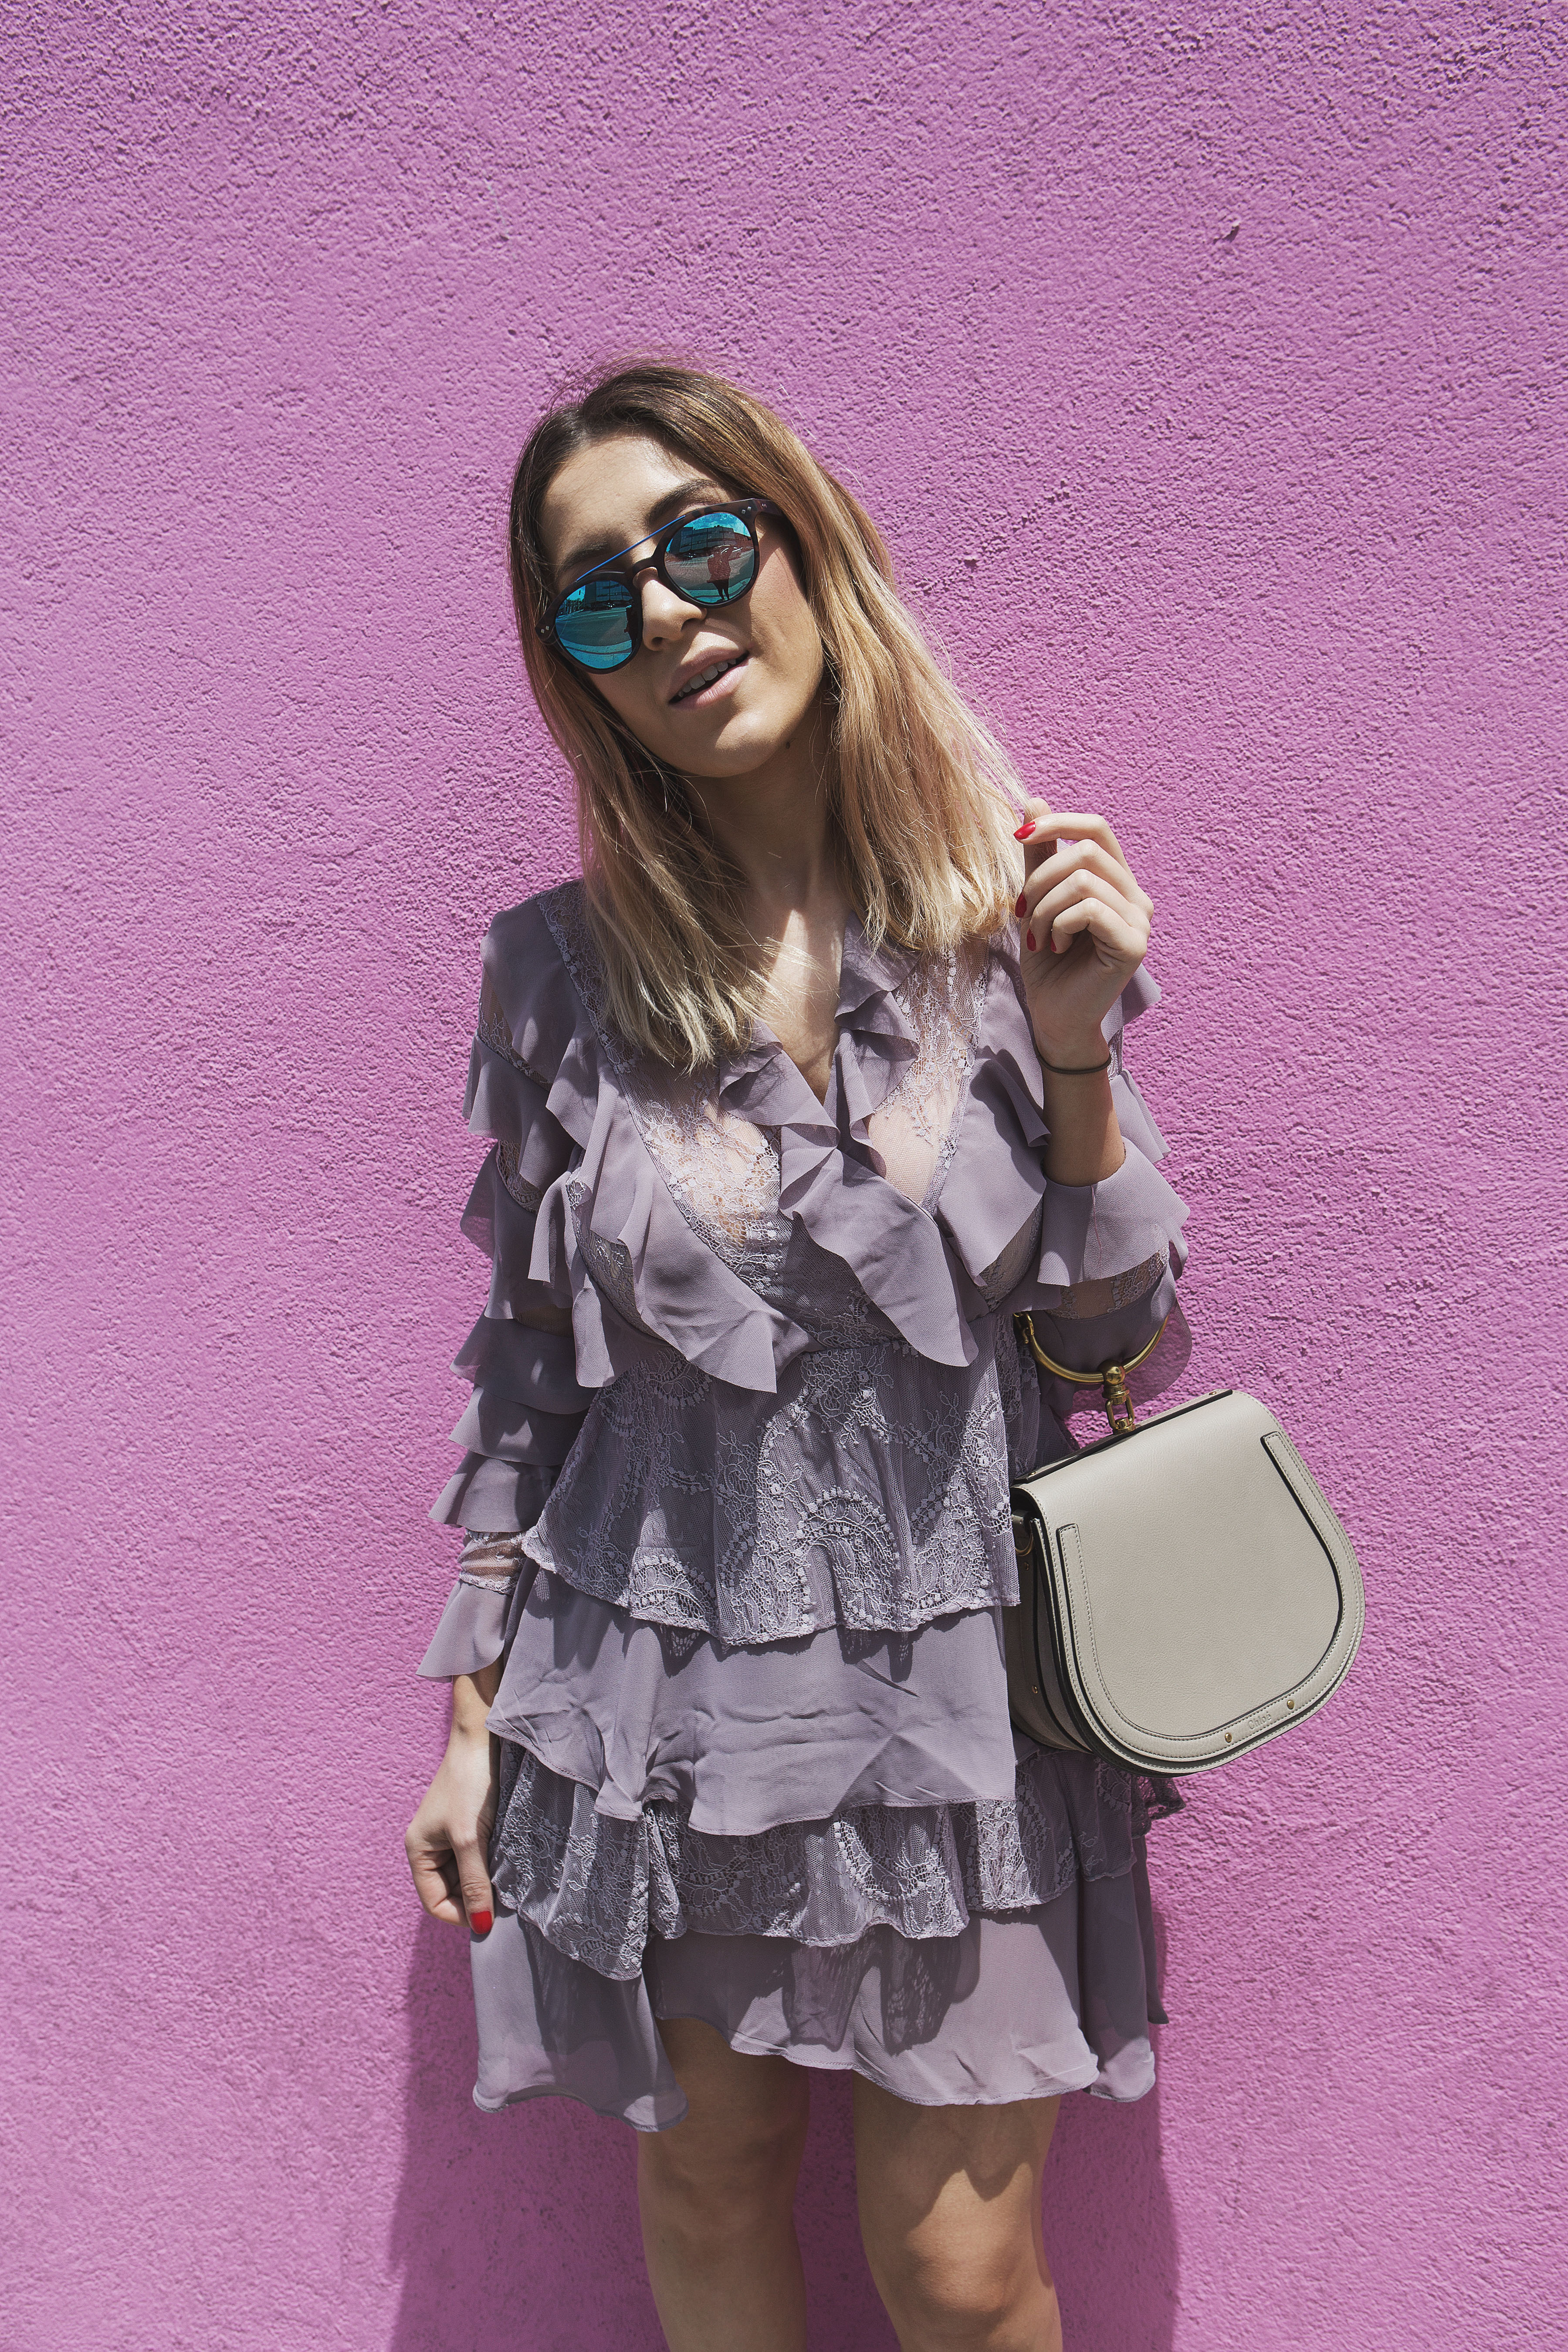 Melrose-Avenue-Blogger How to spend a day in LA like a blogger